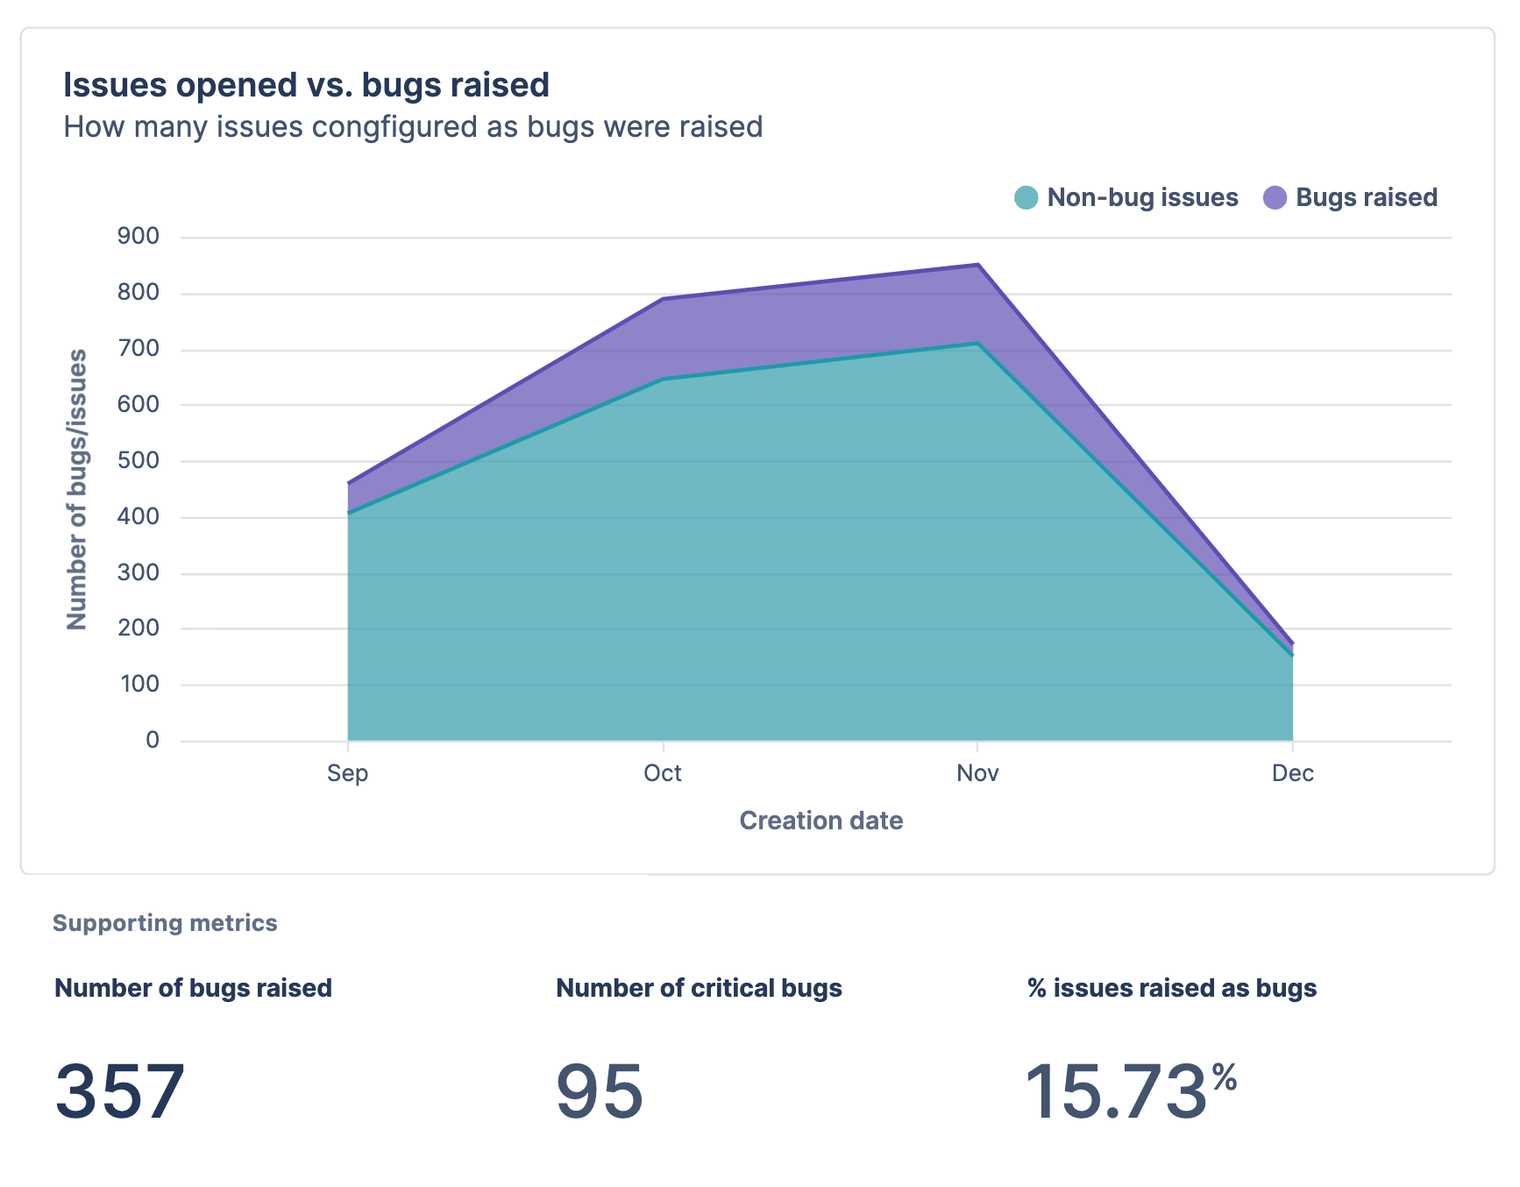 Bar chart and supporting metrics to monitor volume of work for non-bugs vs. bugs.